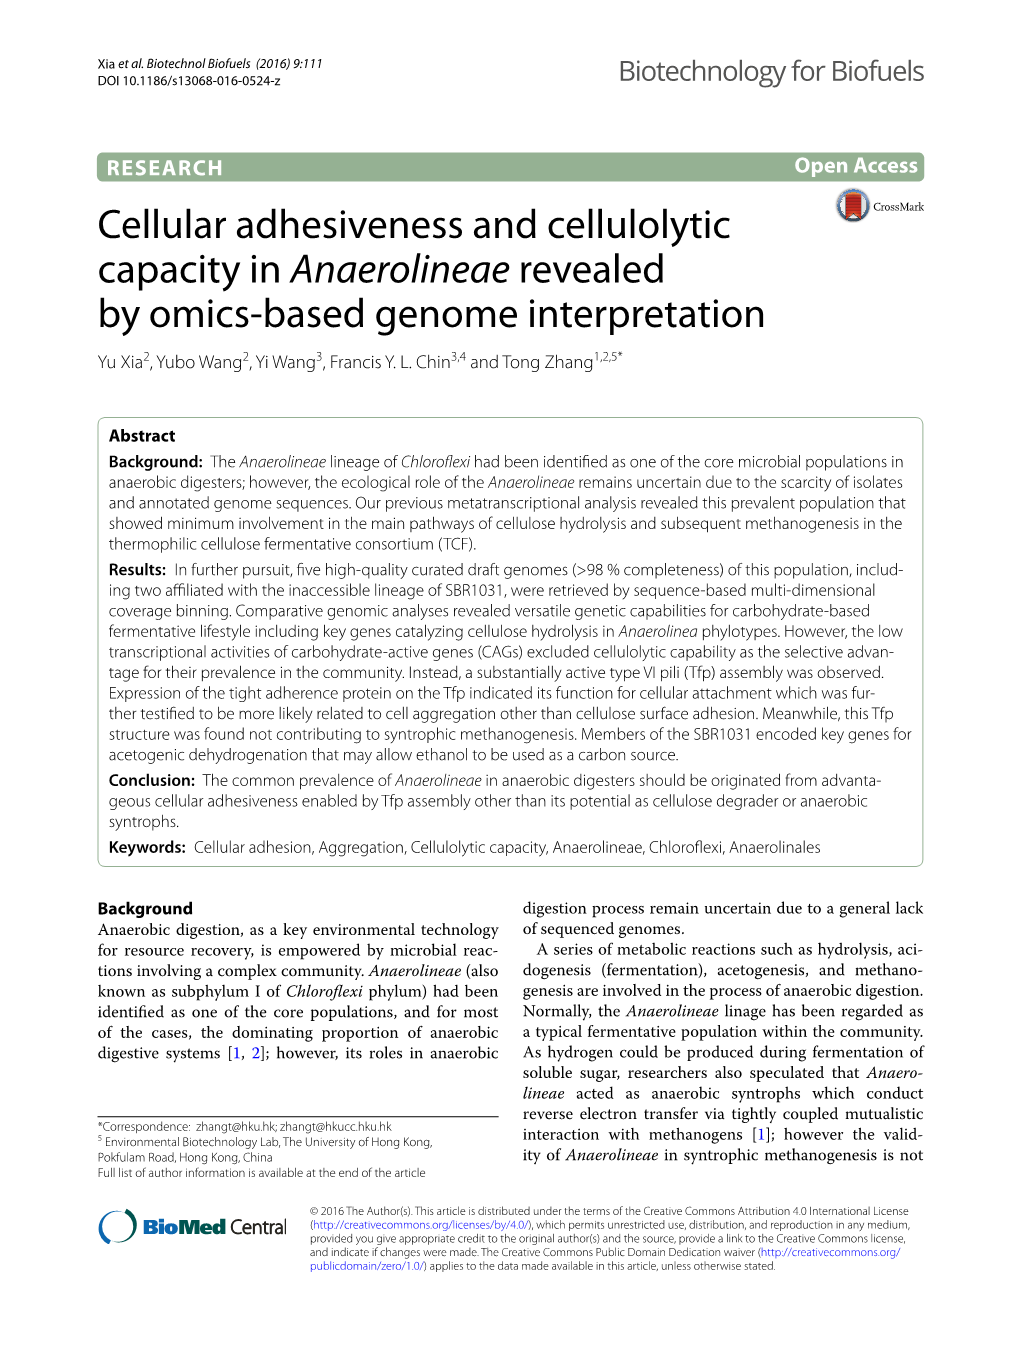 Cellular Adhesiveness and Cellulolytic Capacity in Anaerolineae Revealed by Omics-Based Genome Interpretation